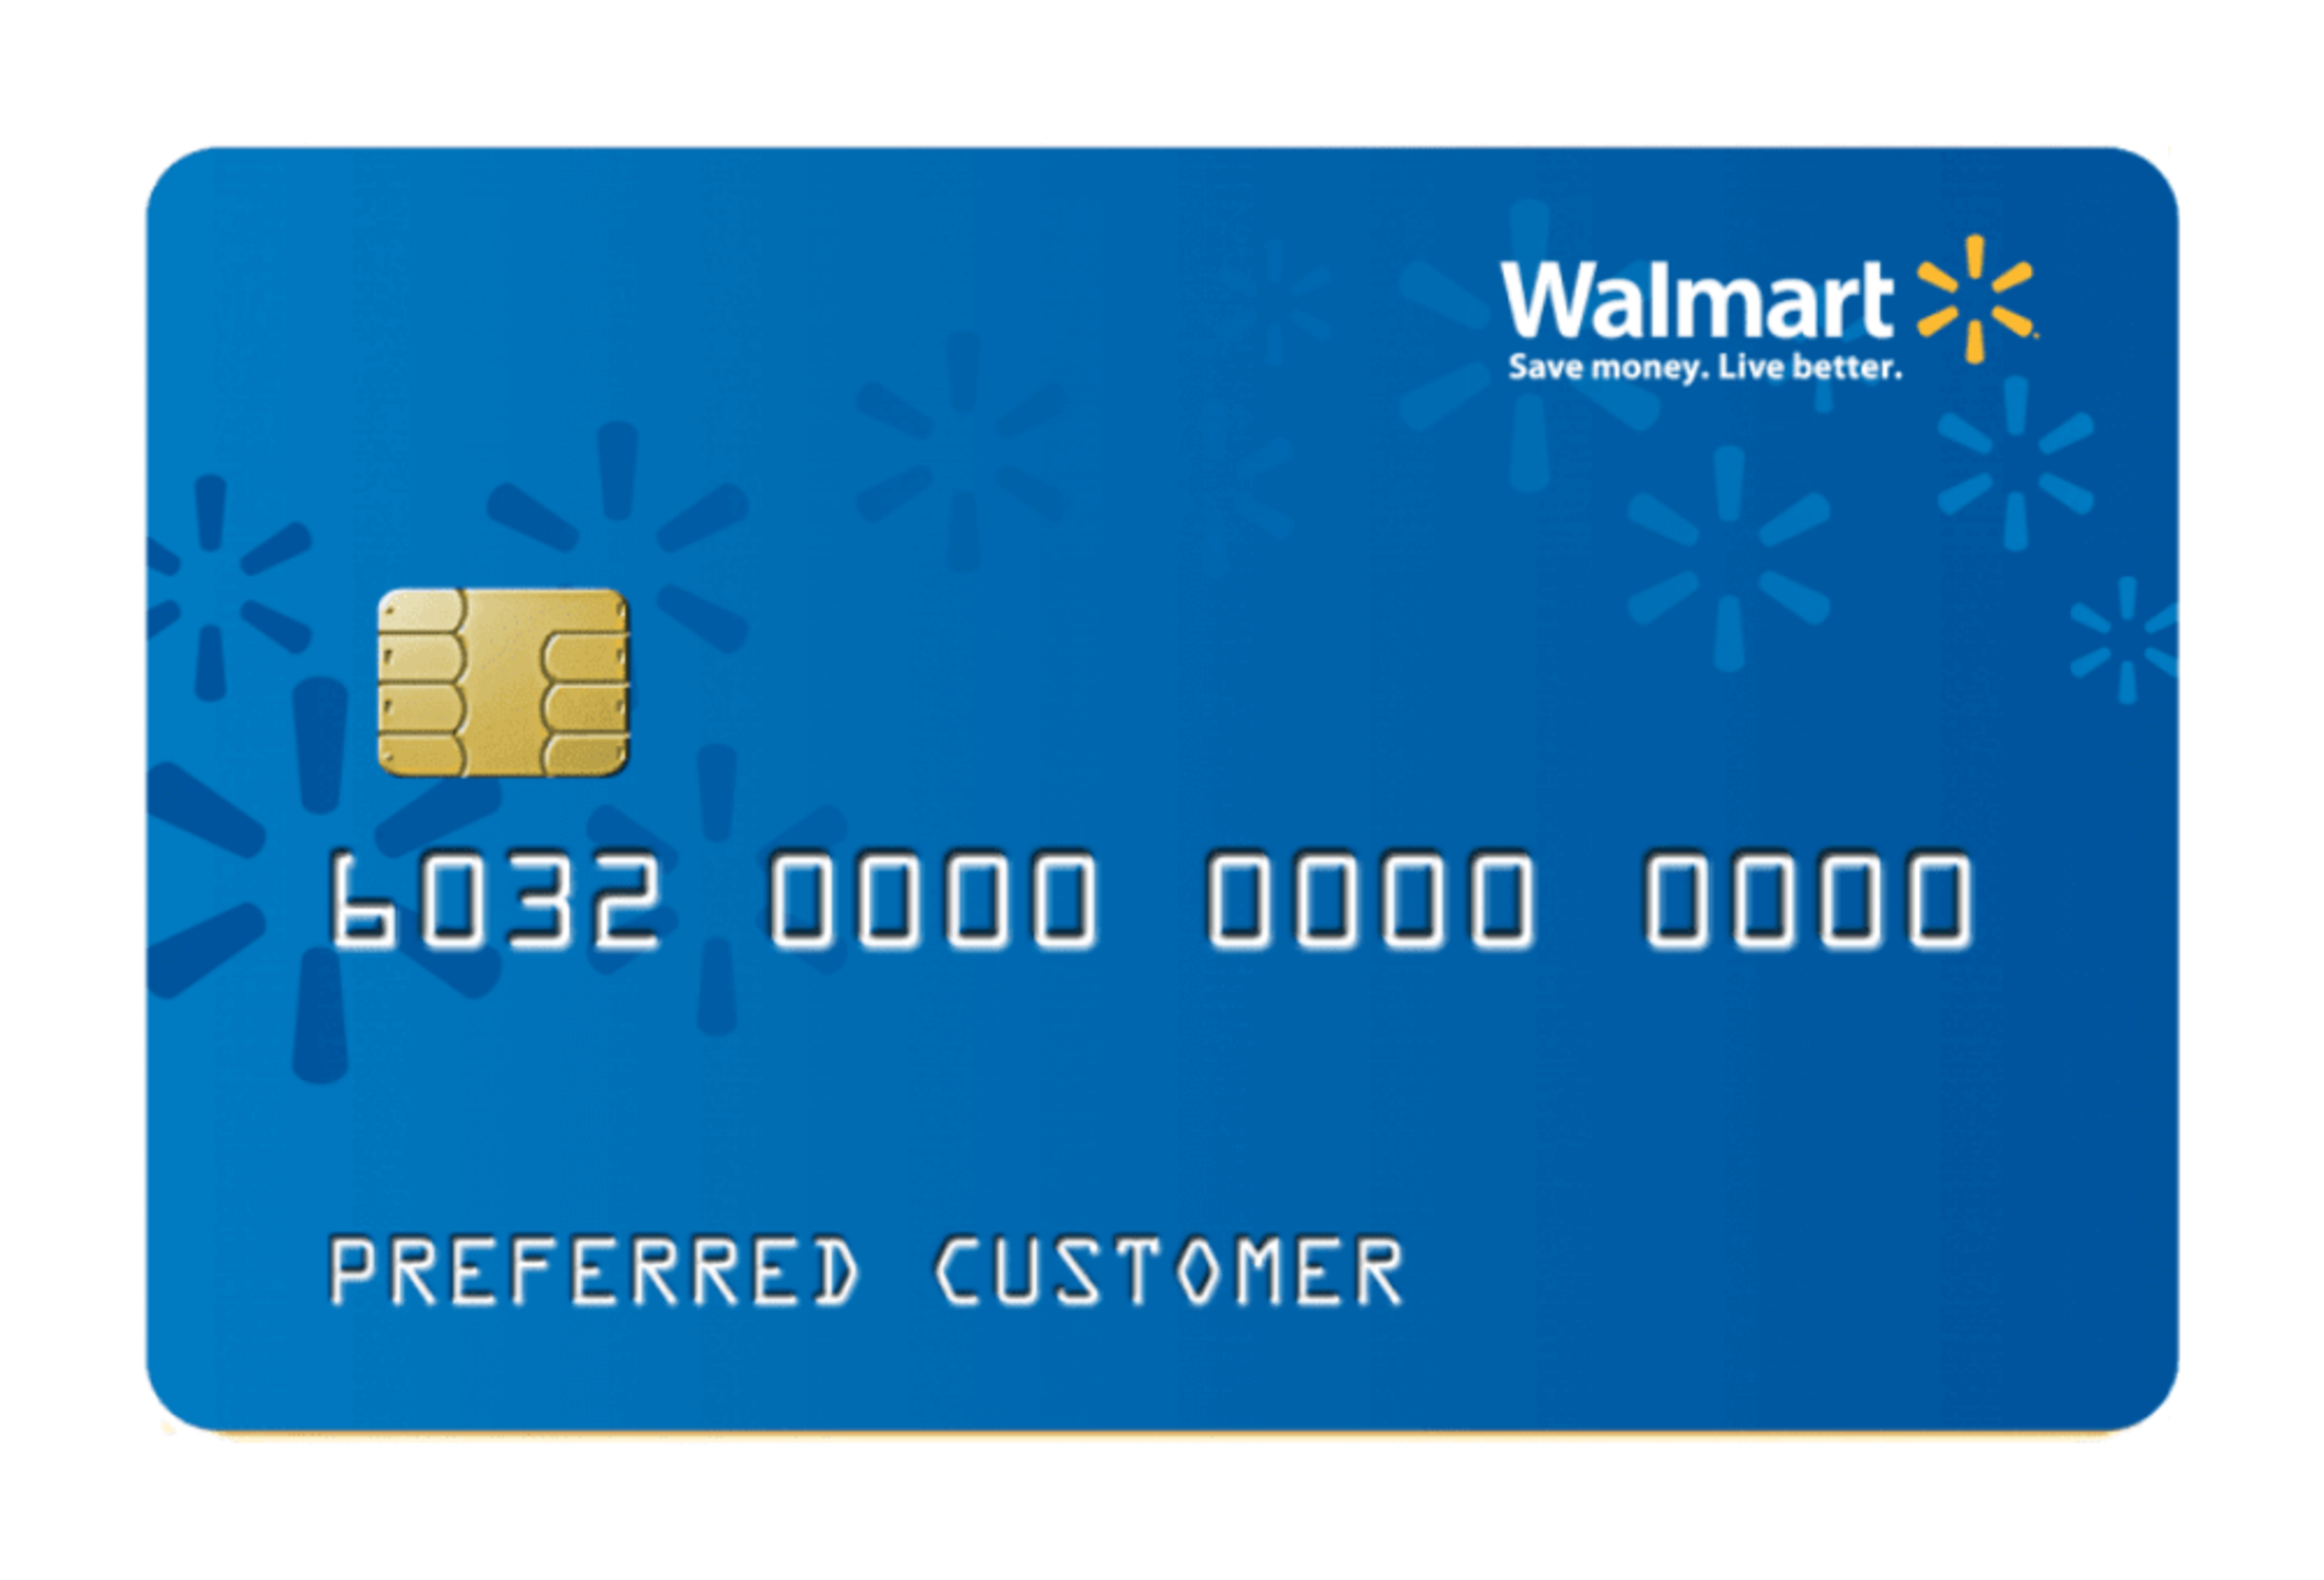 Walmart Credit Card Managed by Tally.